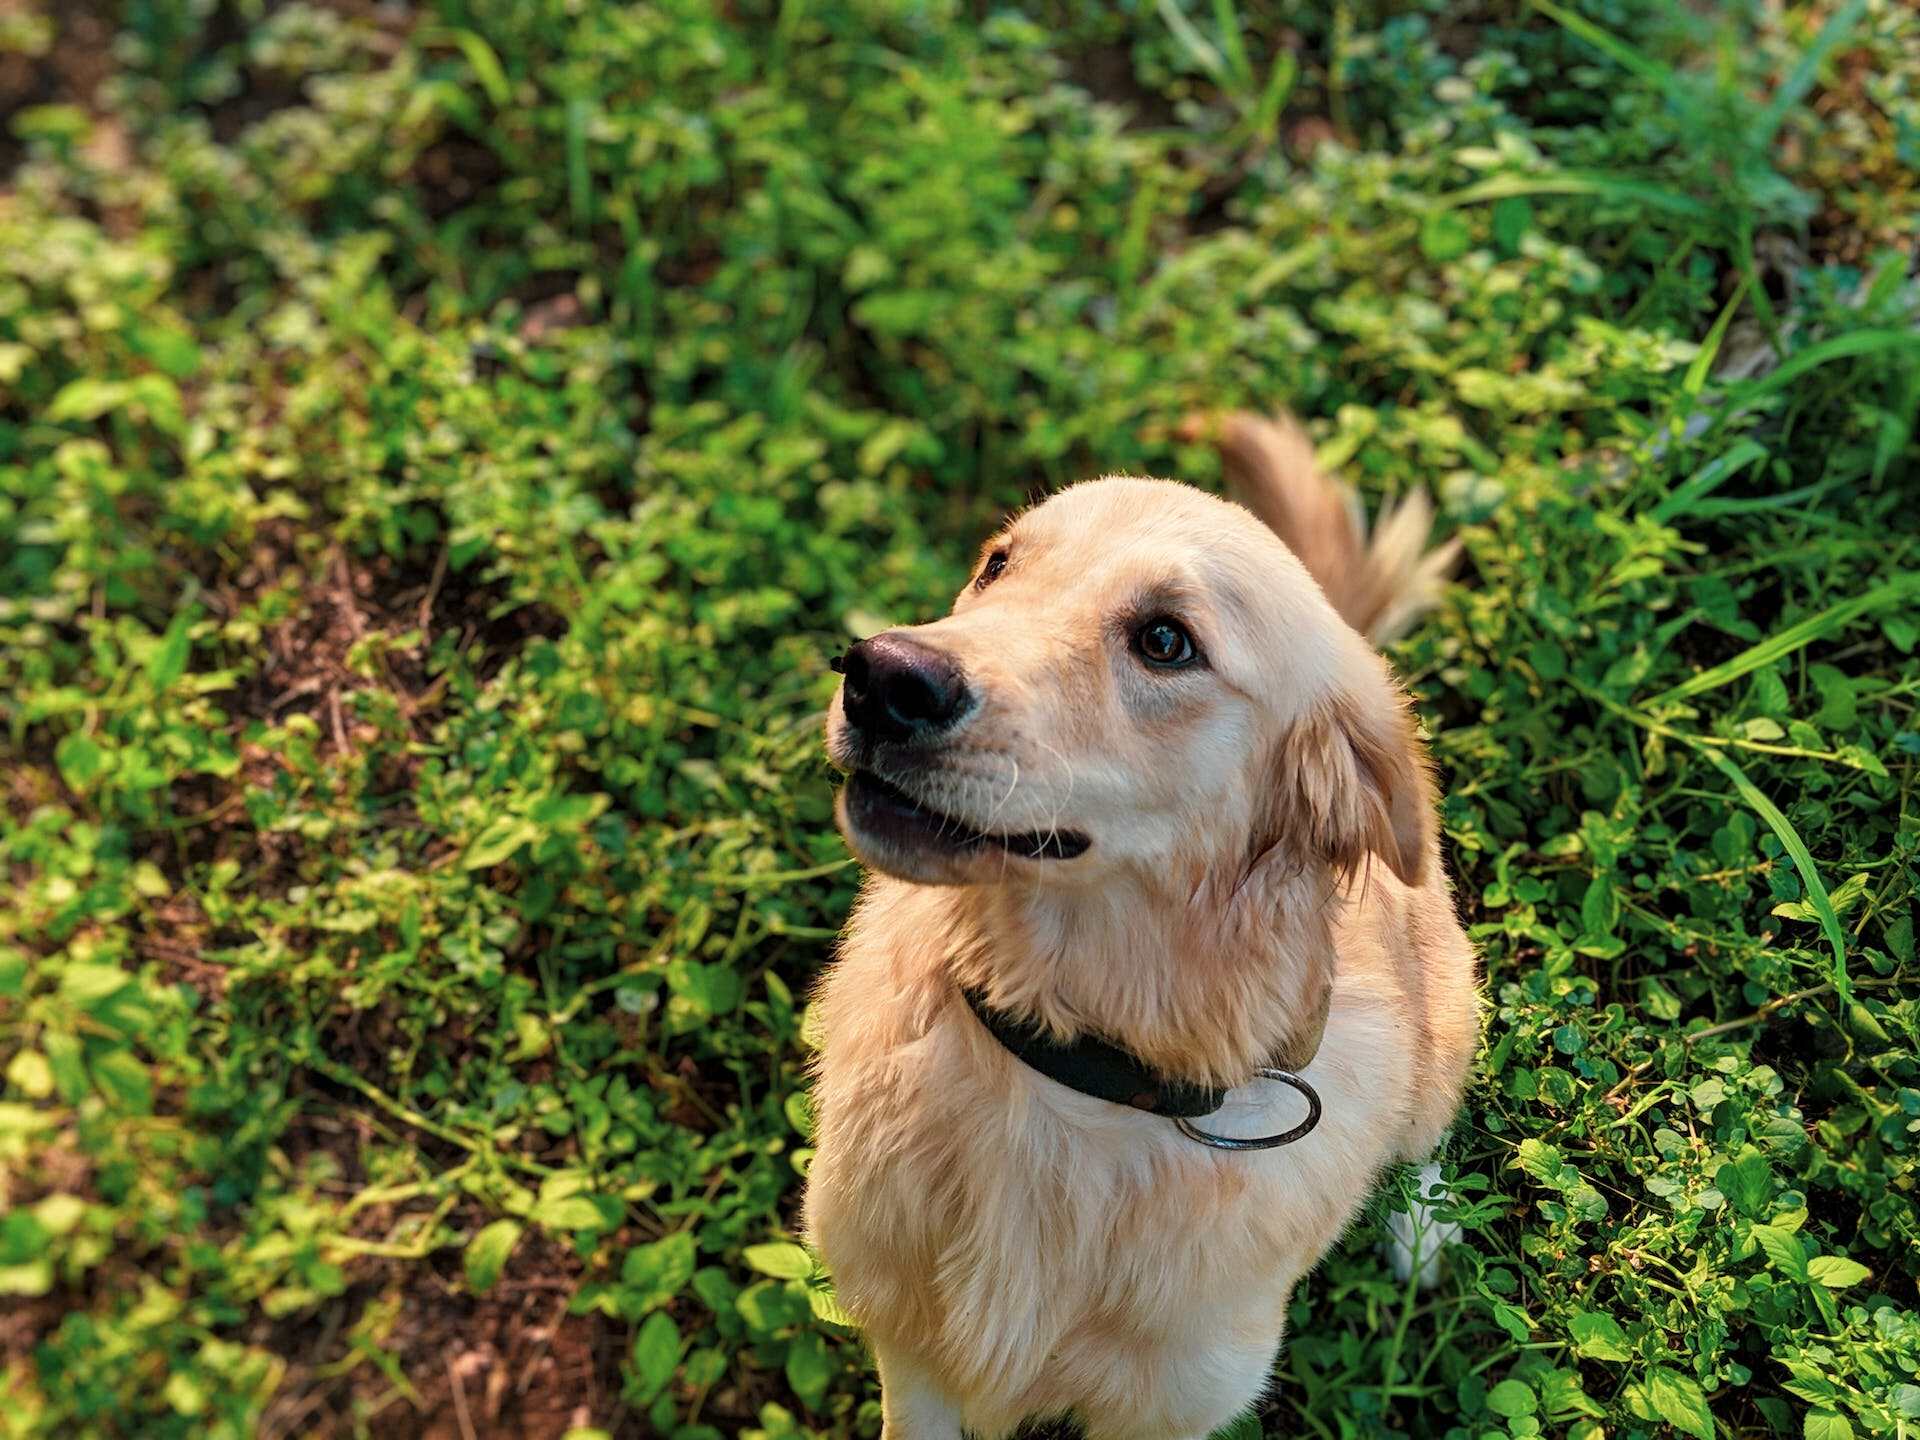 A Retriever puppy standing in a grassy patch of forest